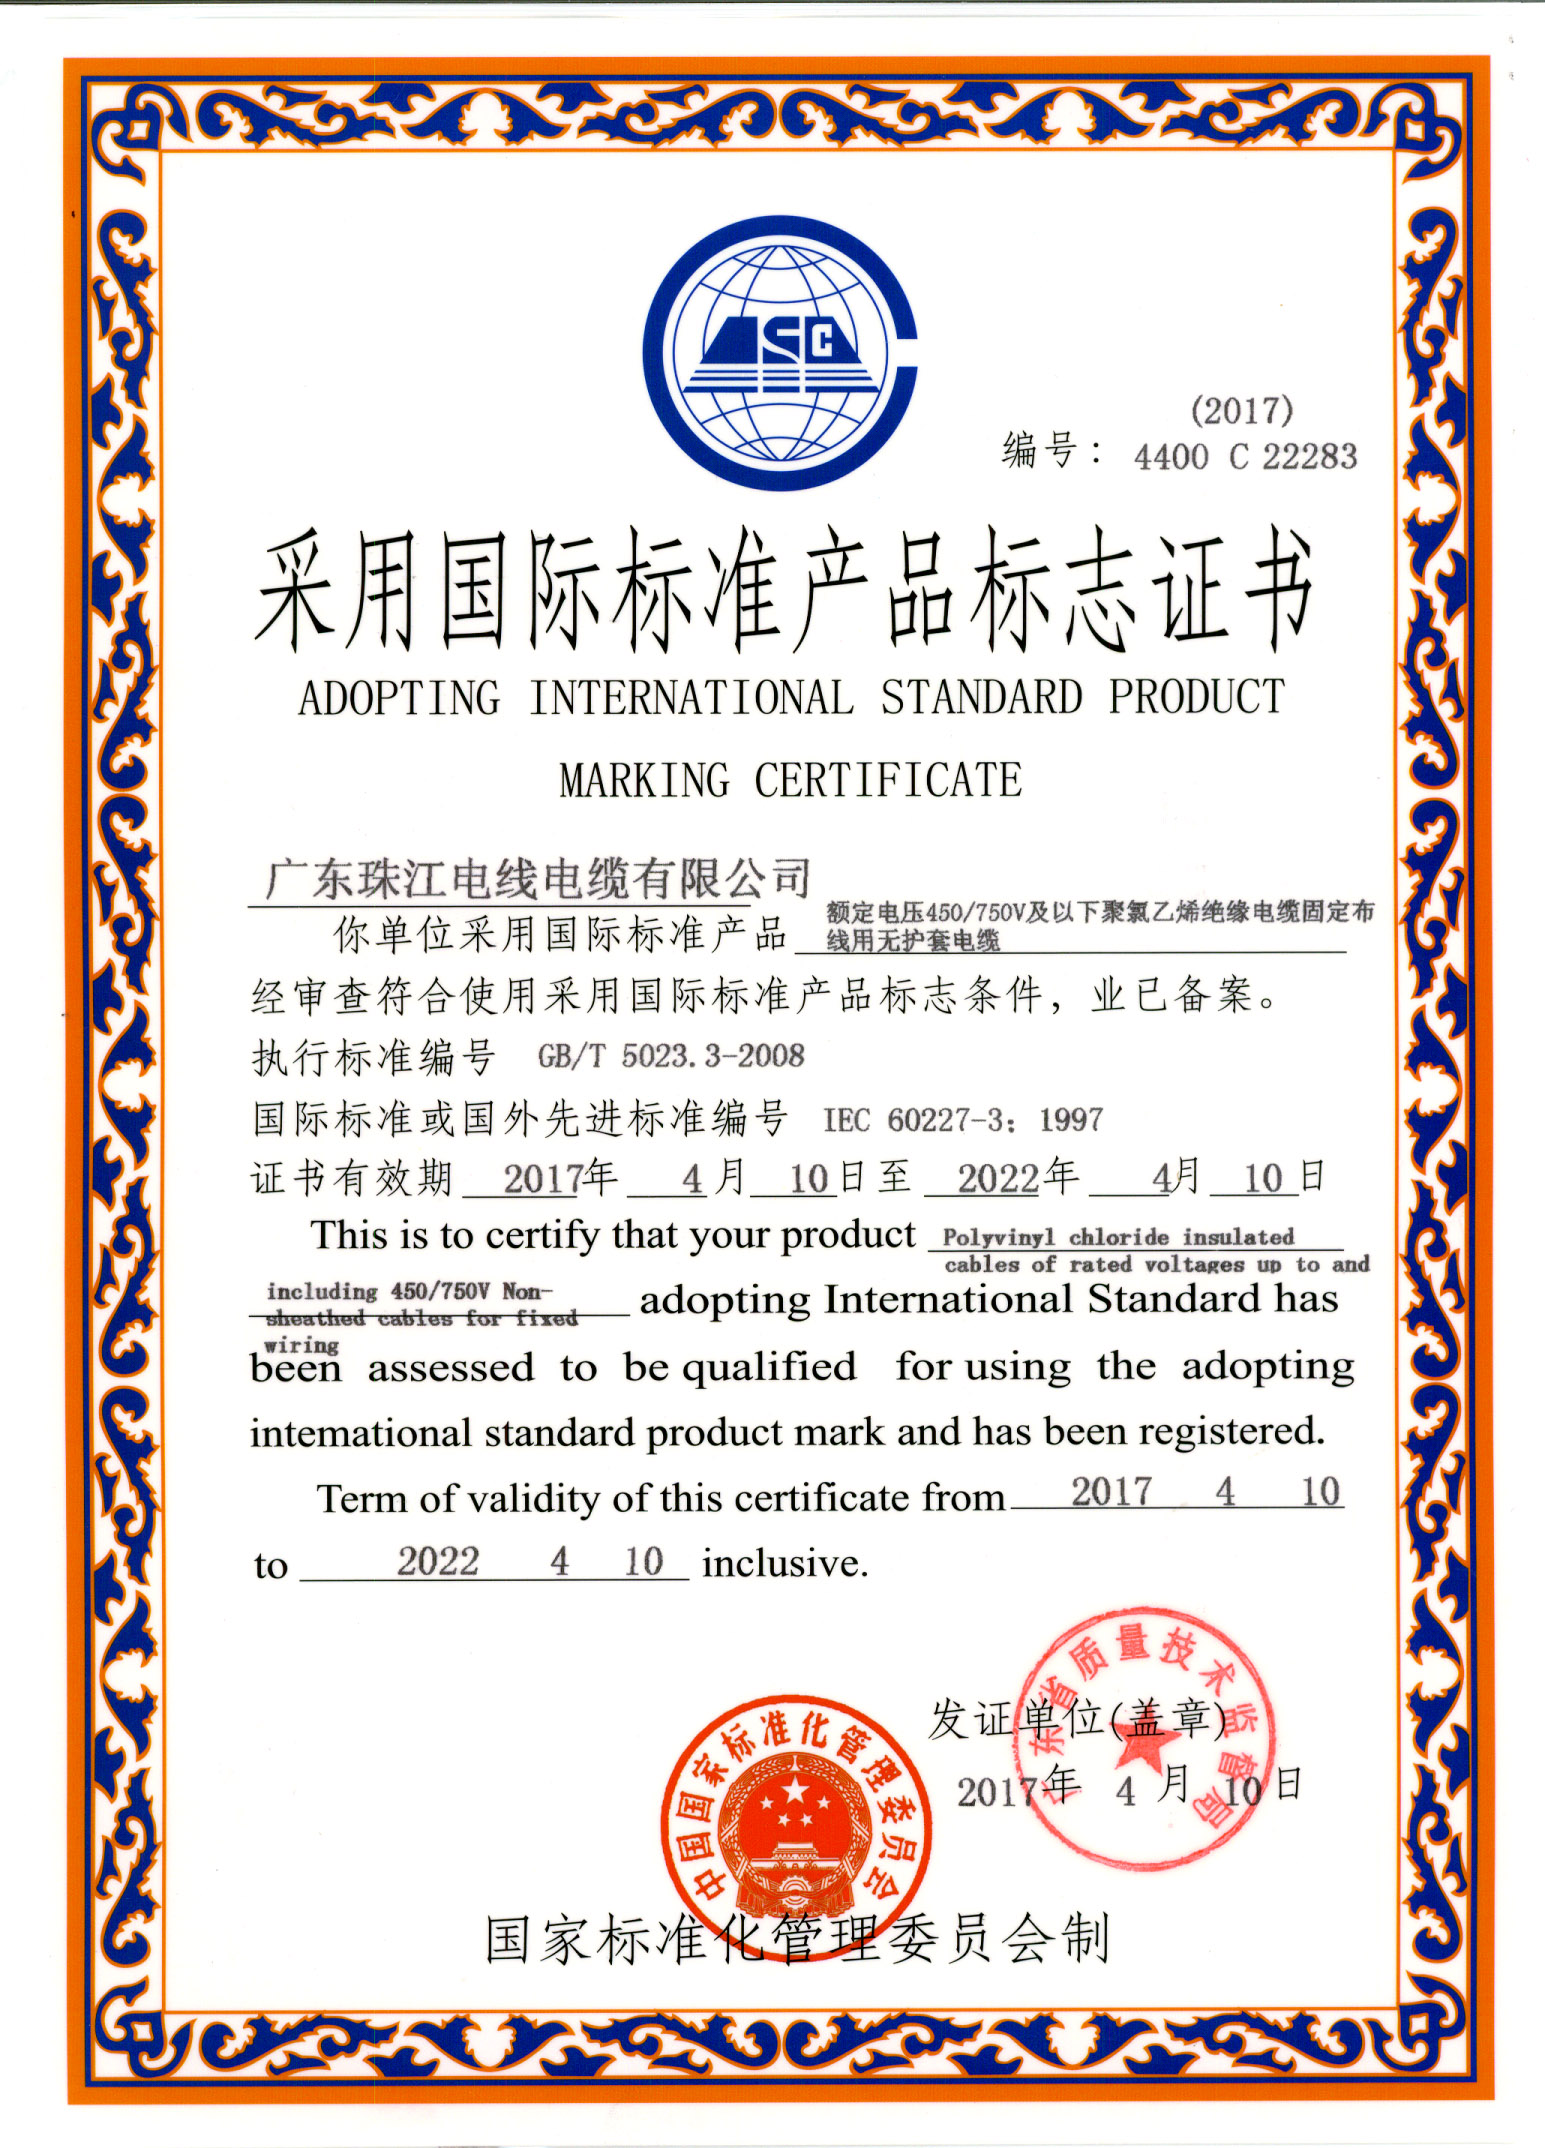 Adopt the national standard product logo certificate (283)